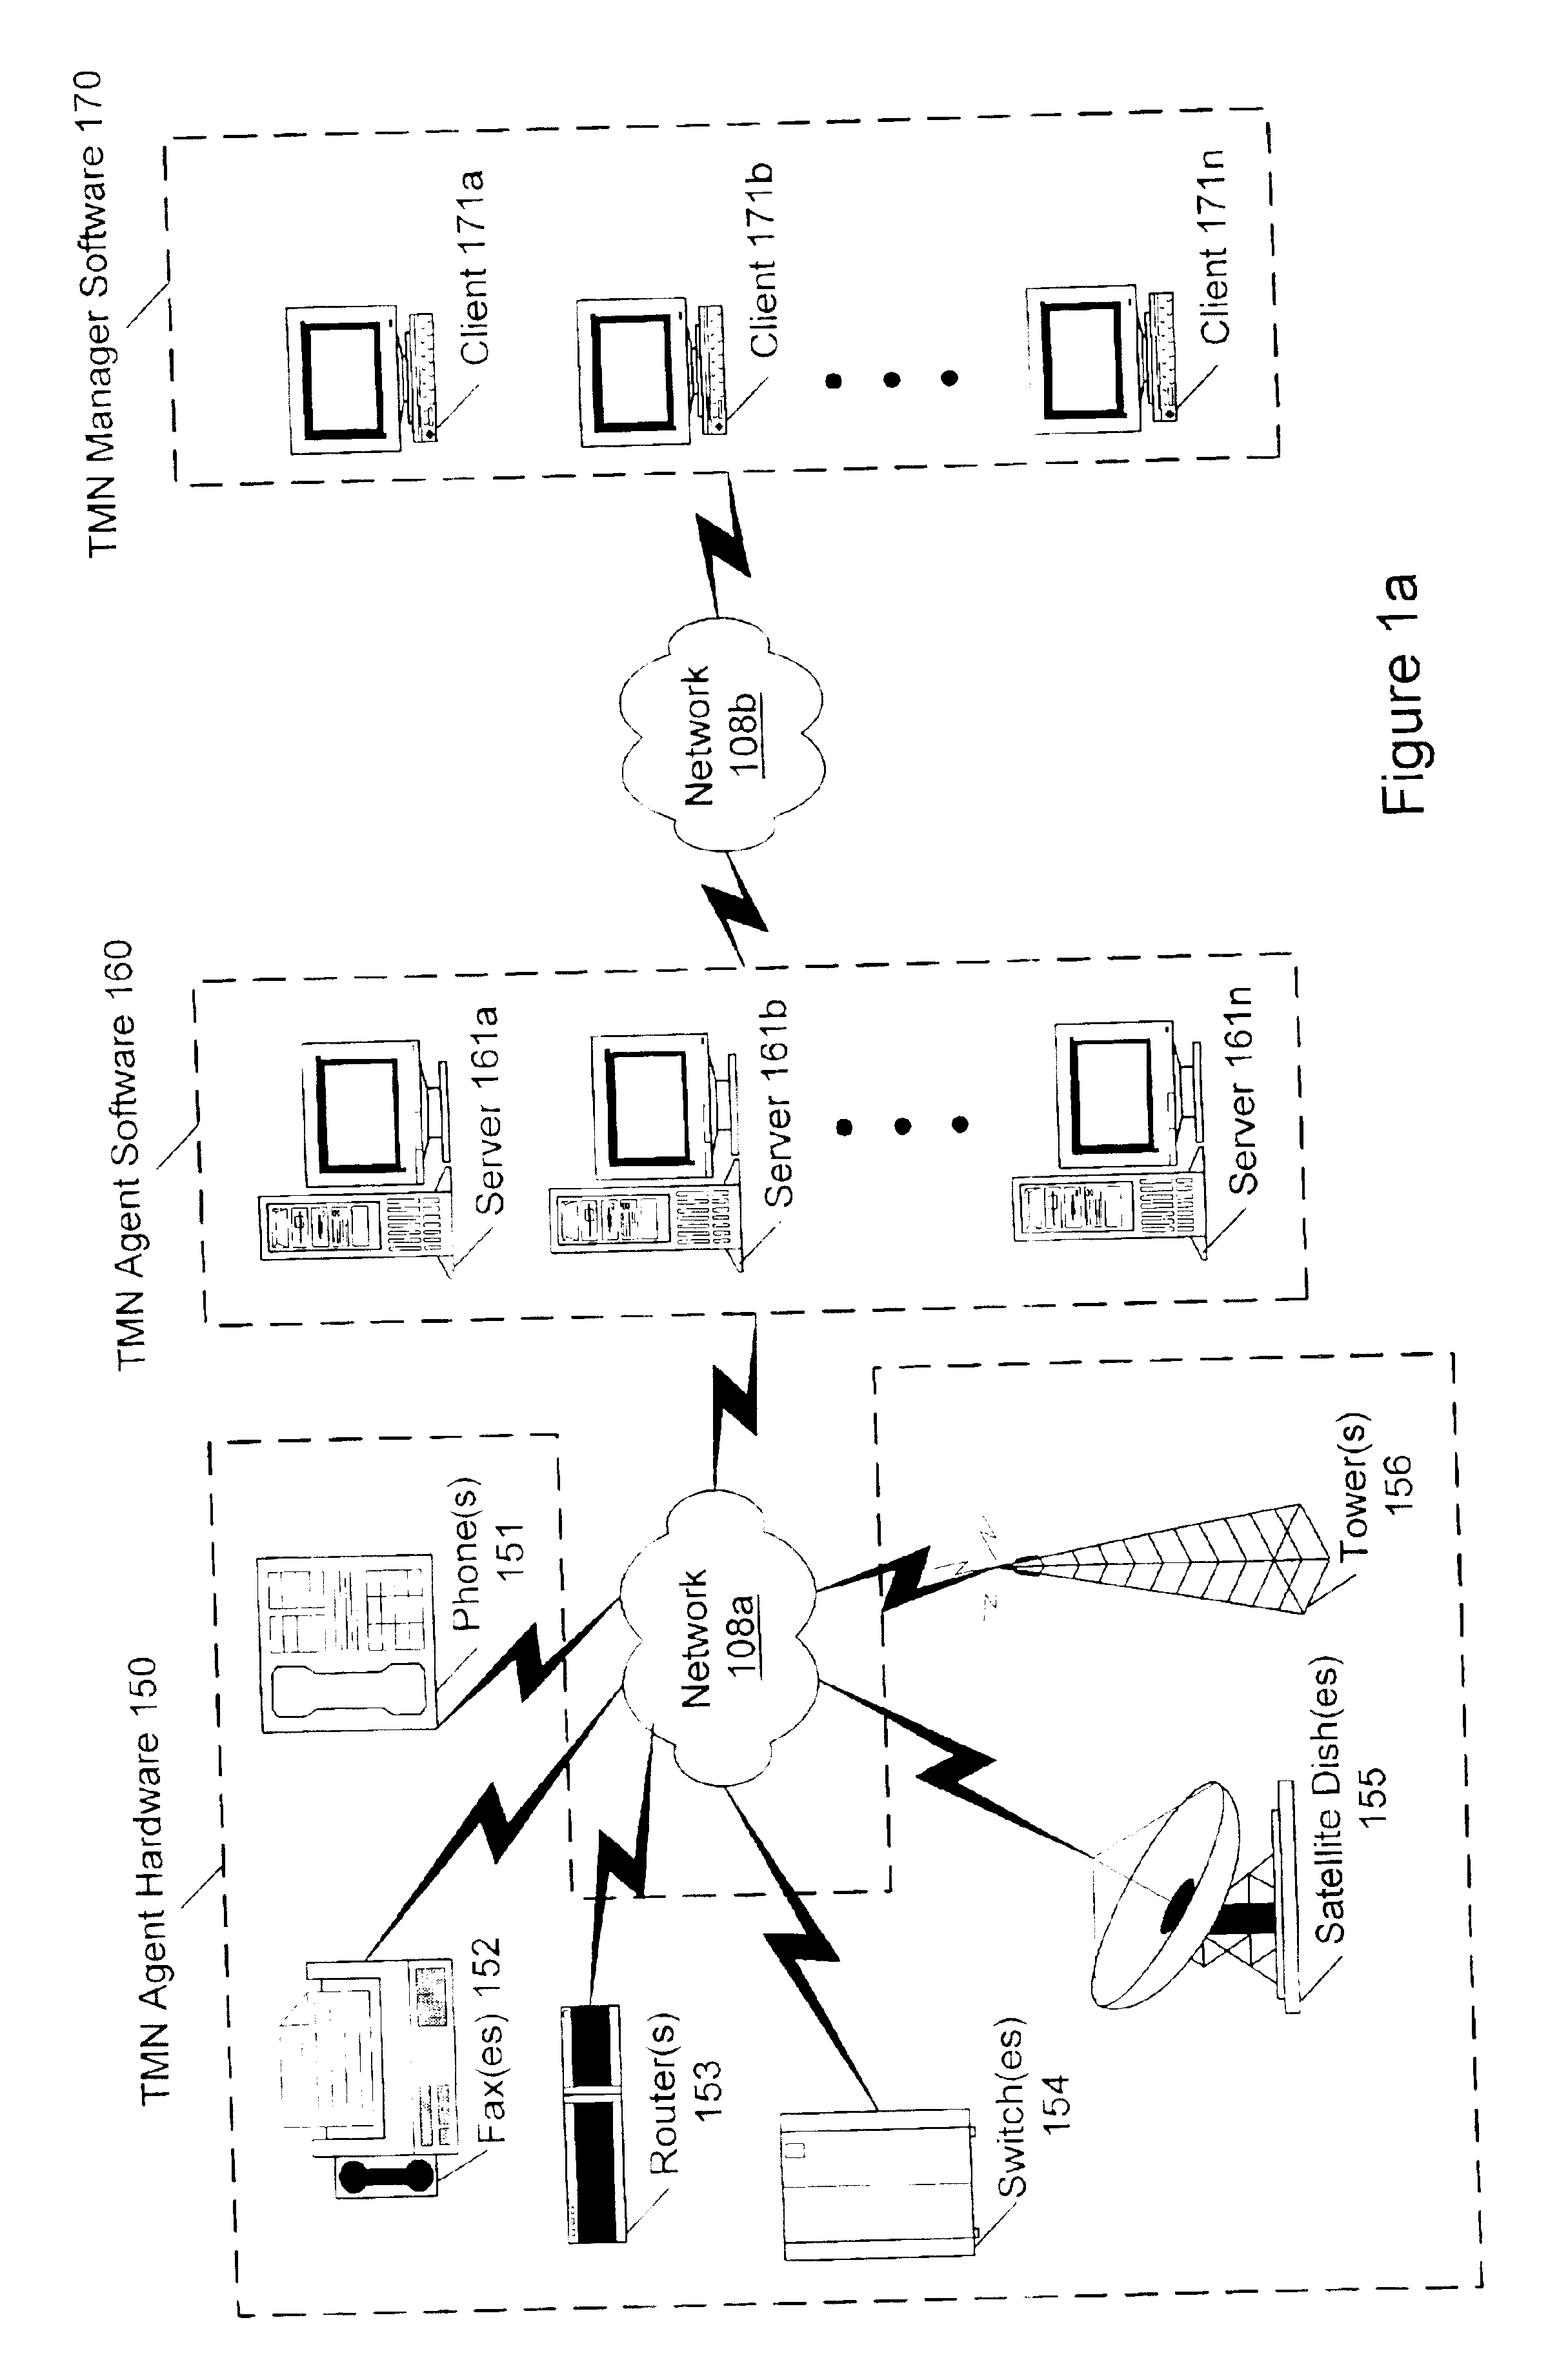 Abstract syntax notation to interface definition language converter framework for network management